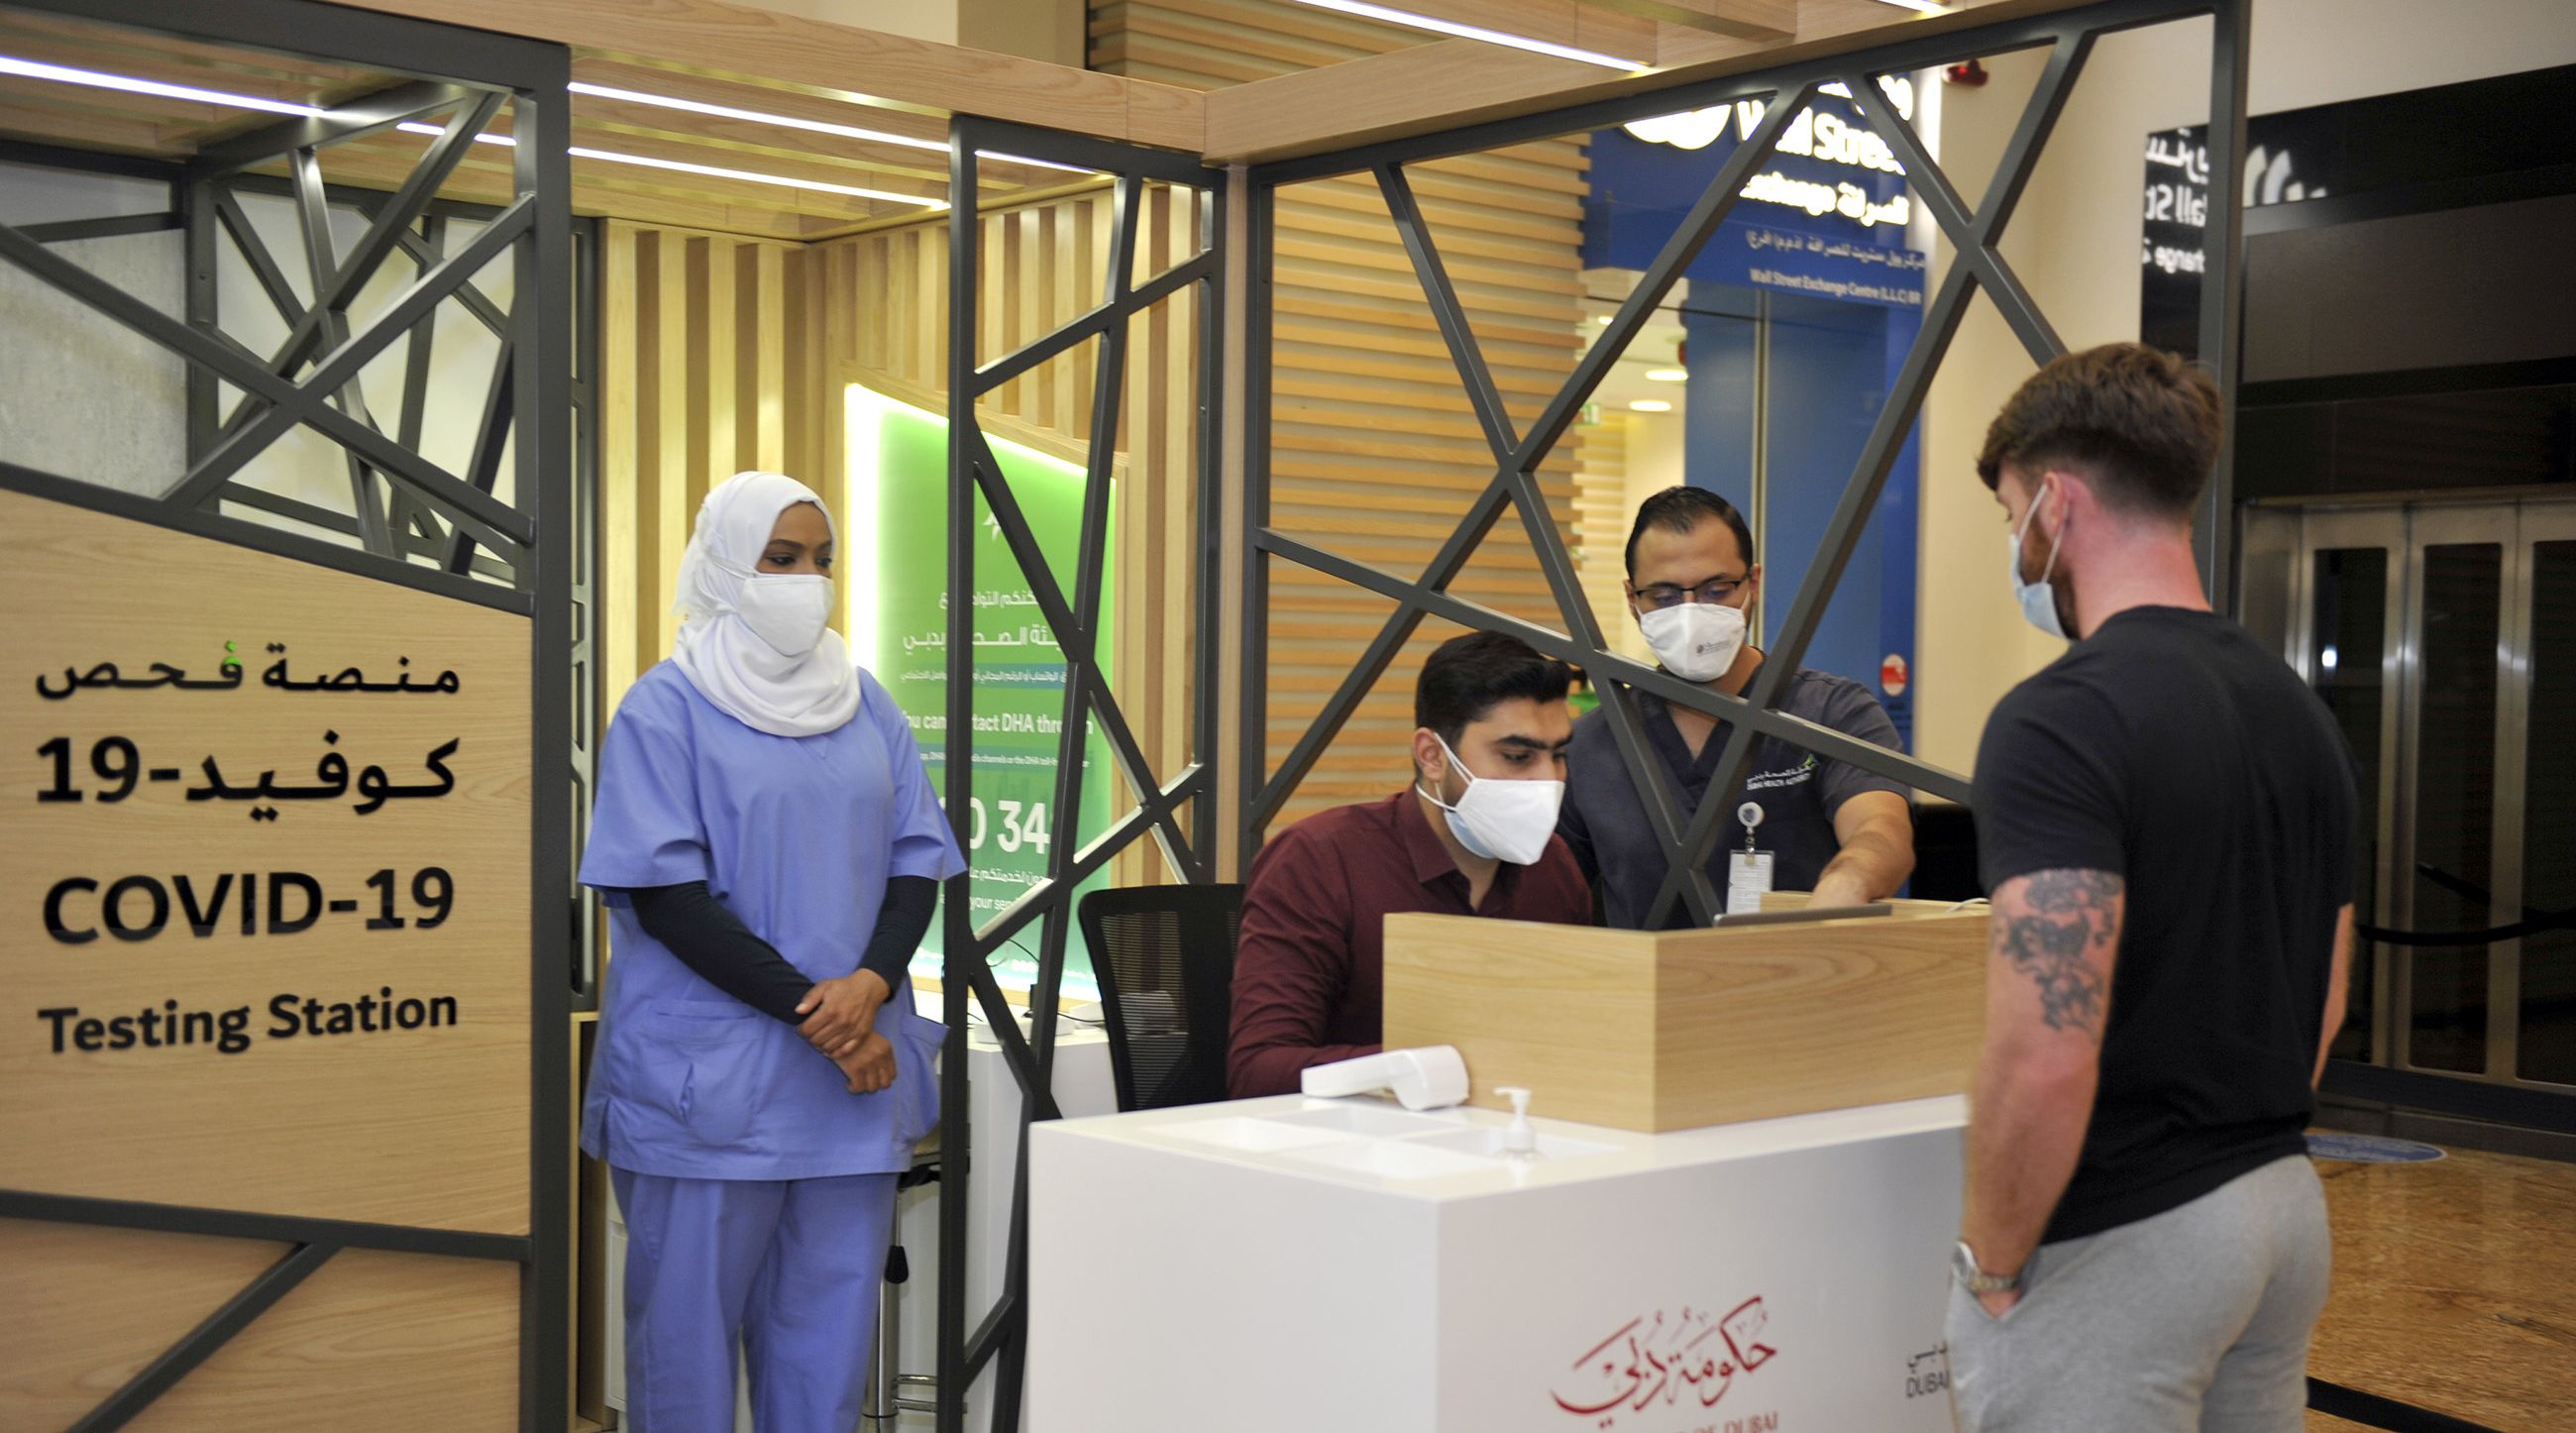 Covid-19 PCR testing stations in malls across Dubai have changed timings, DHA announces the revised schedule